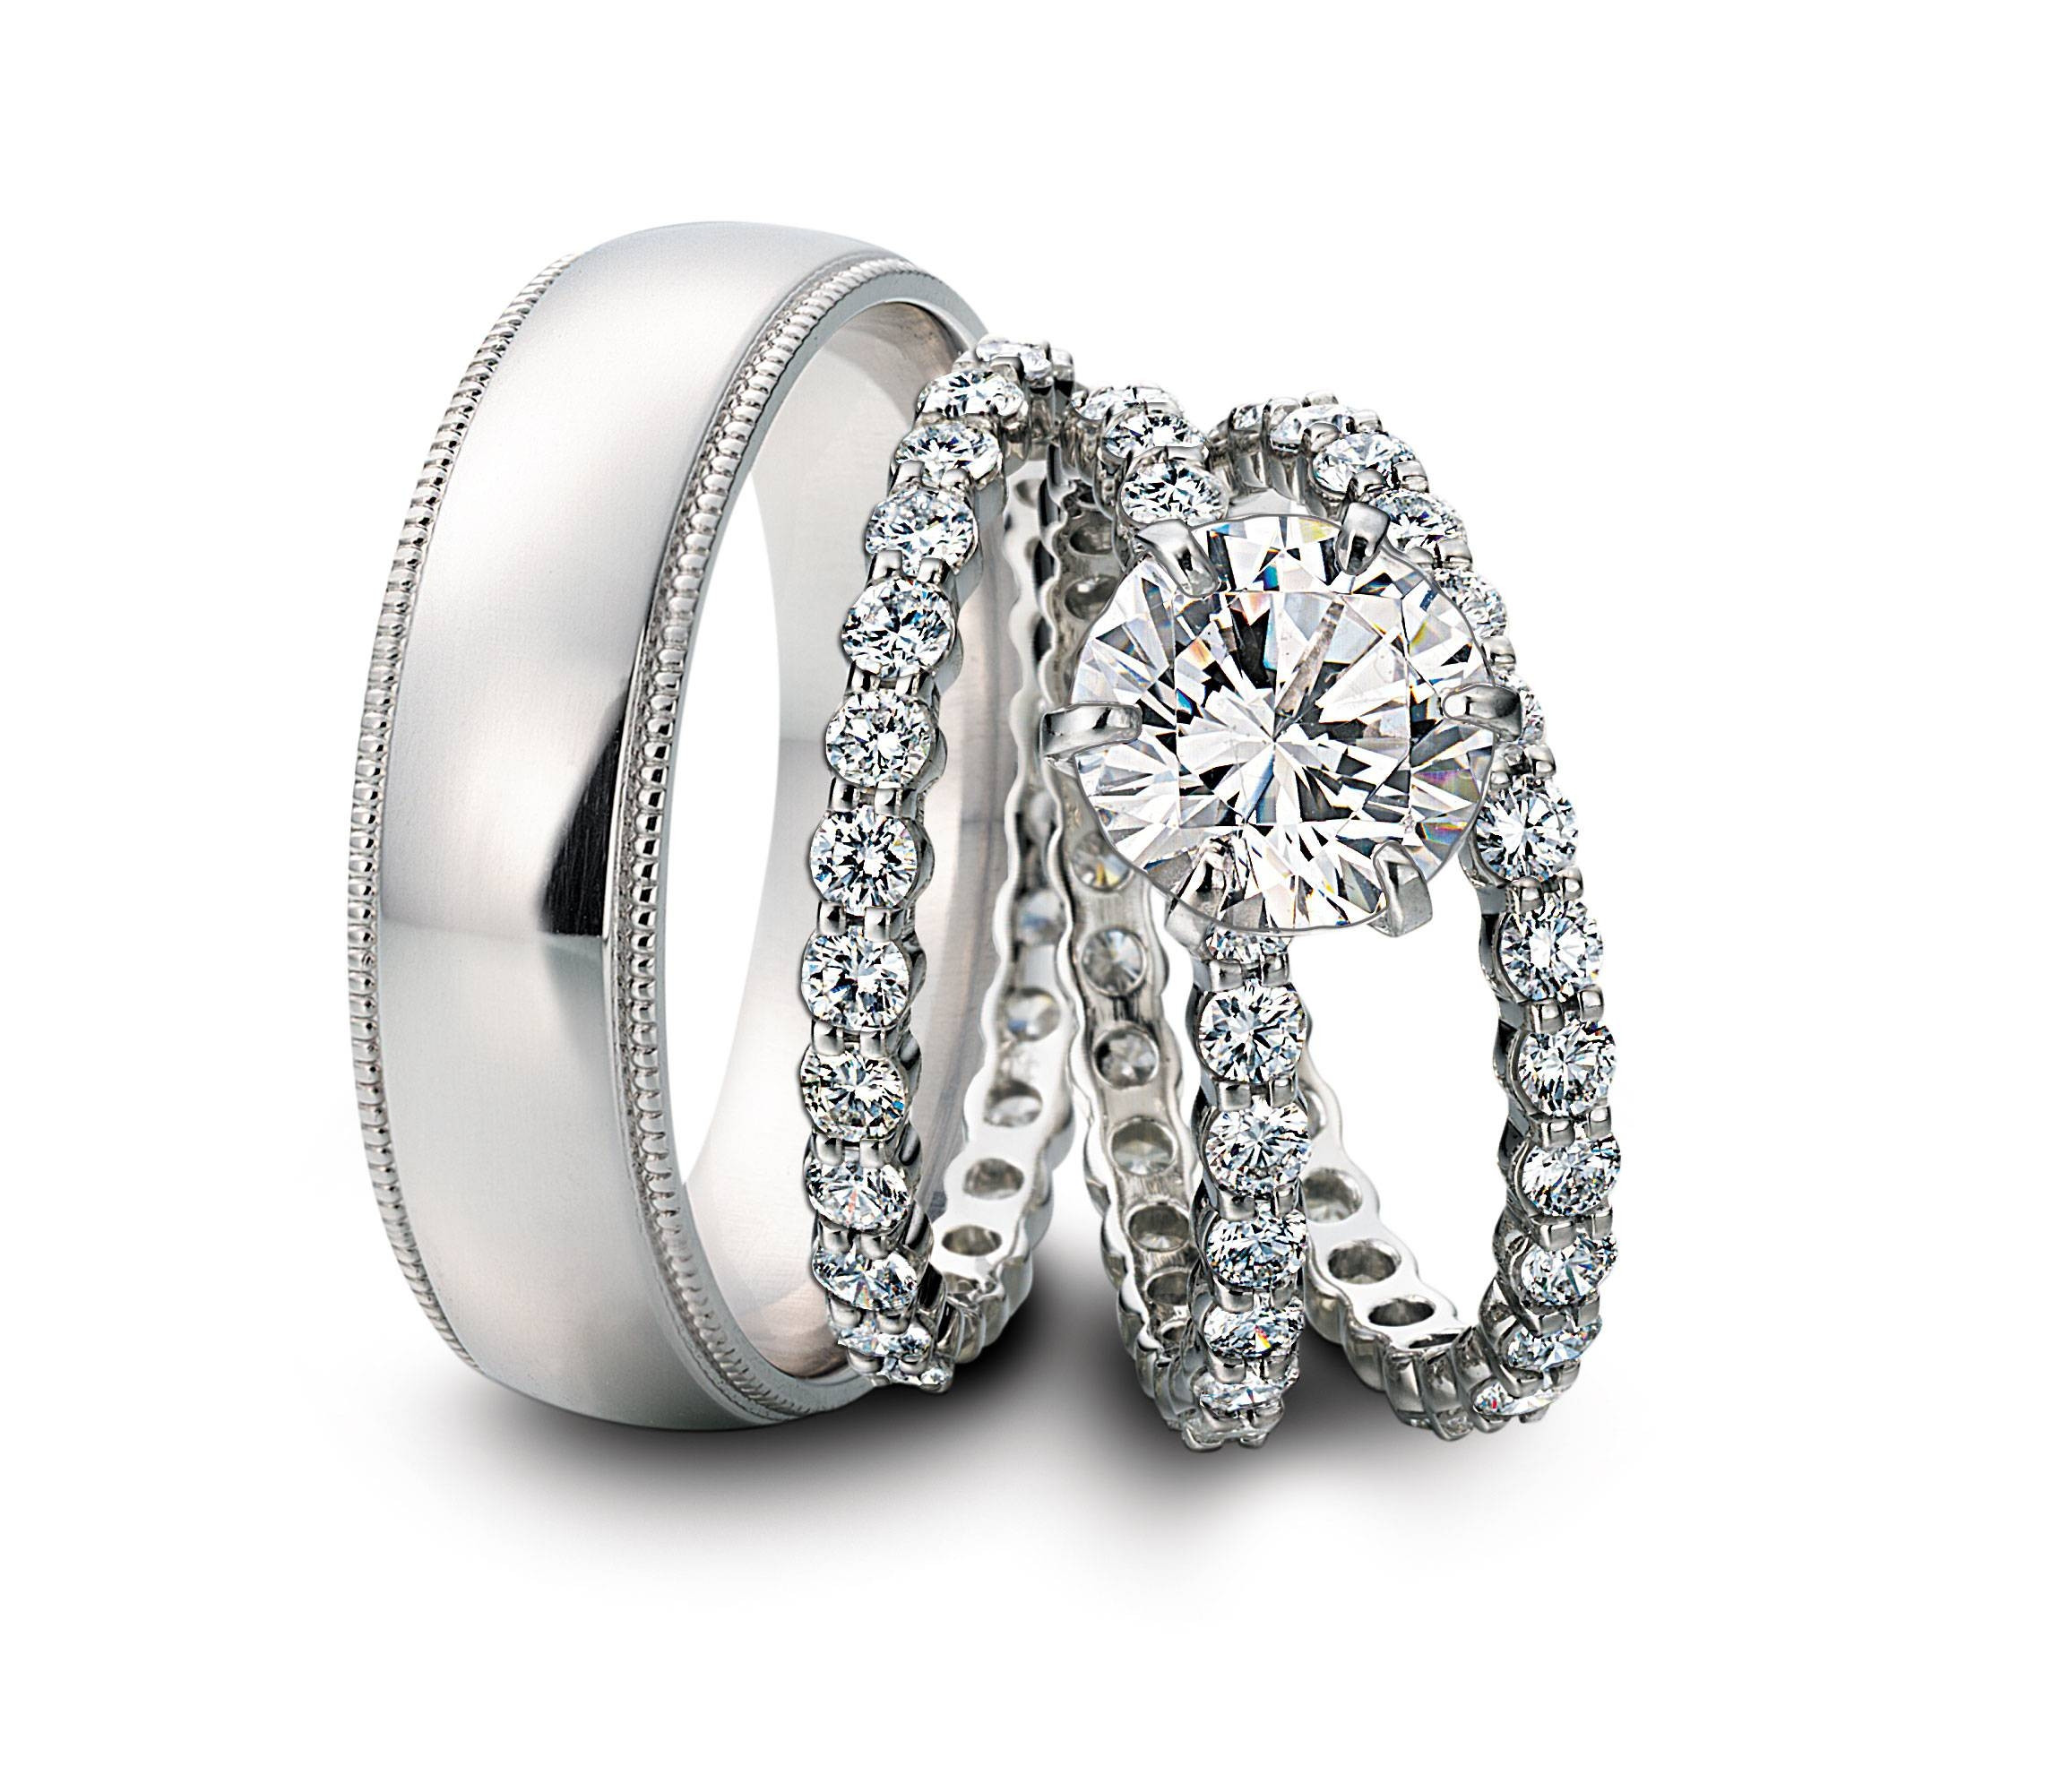 Cheap Wedding Rings Sets For Him And Her
 15 Inspirations of Cheap Wedding Bands Sets His And Hers